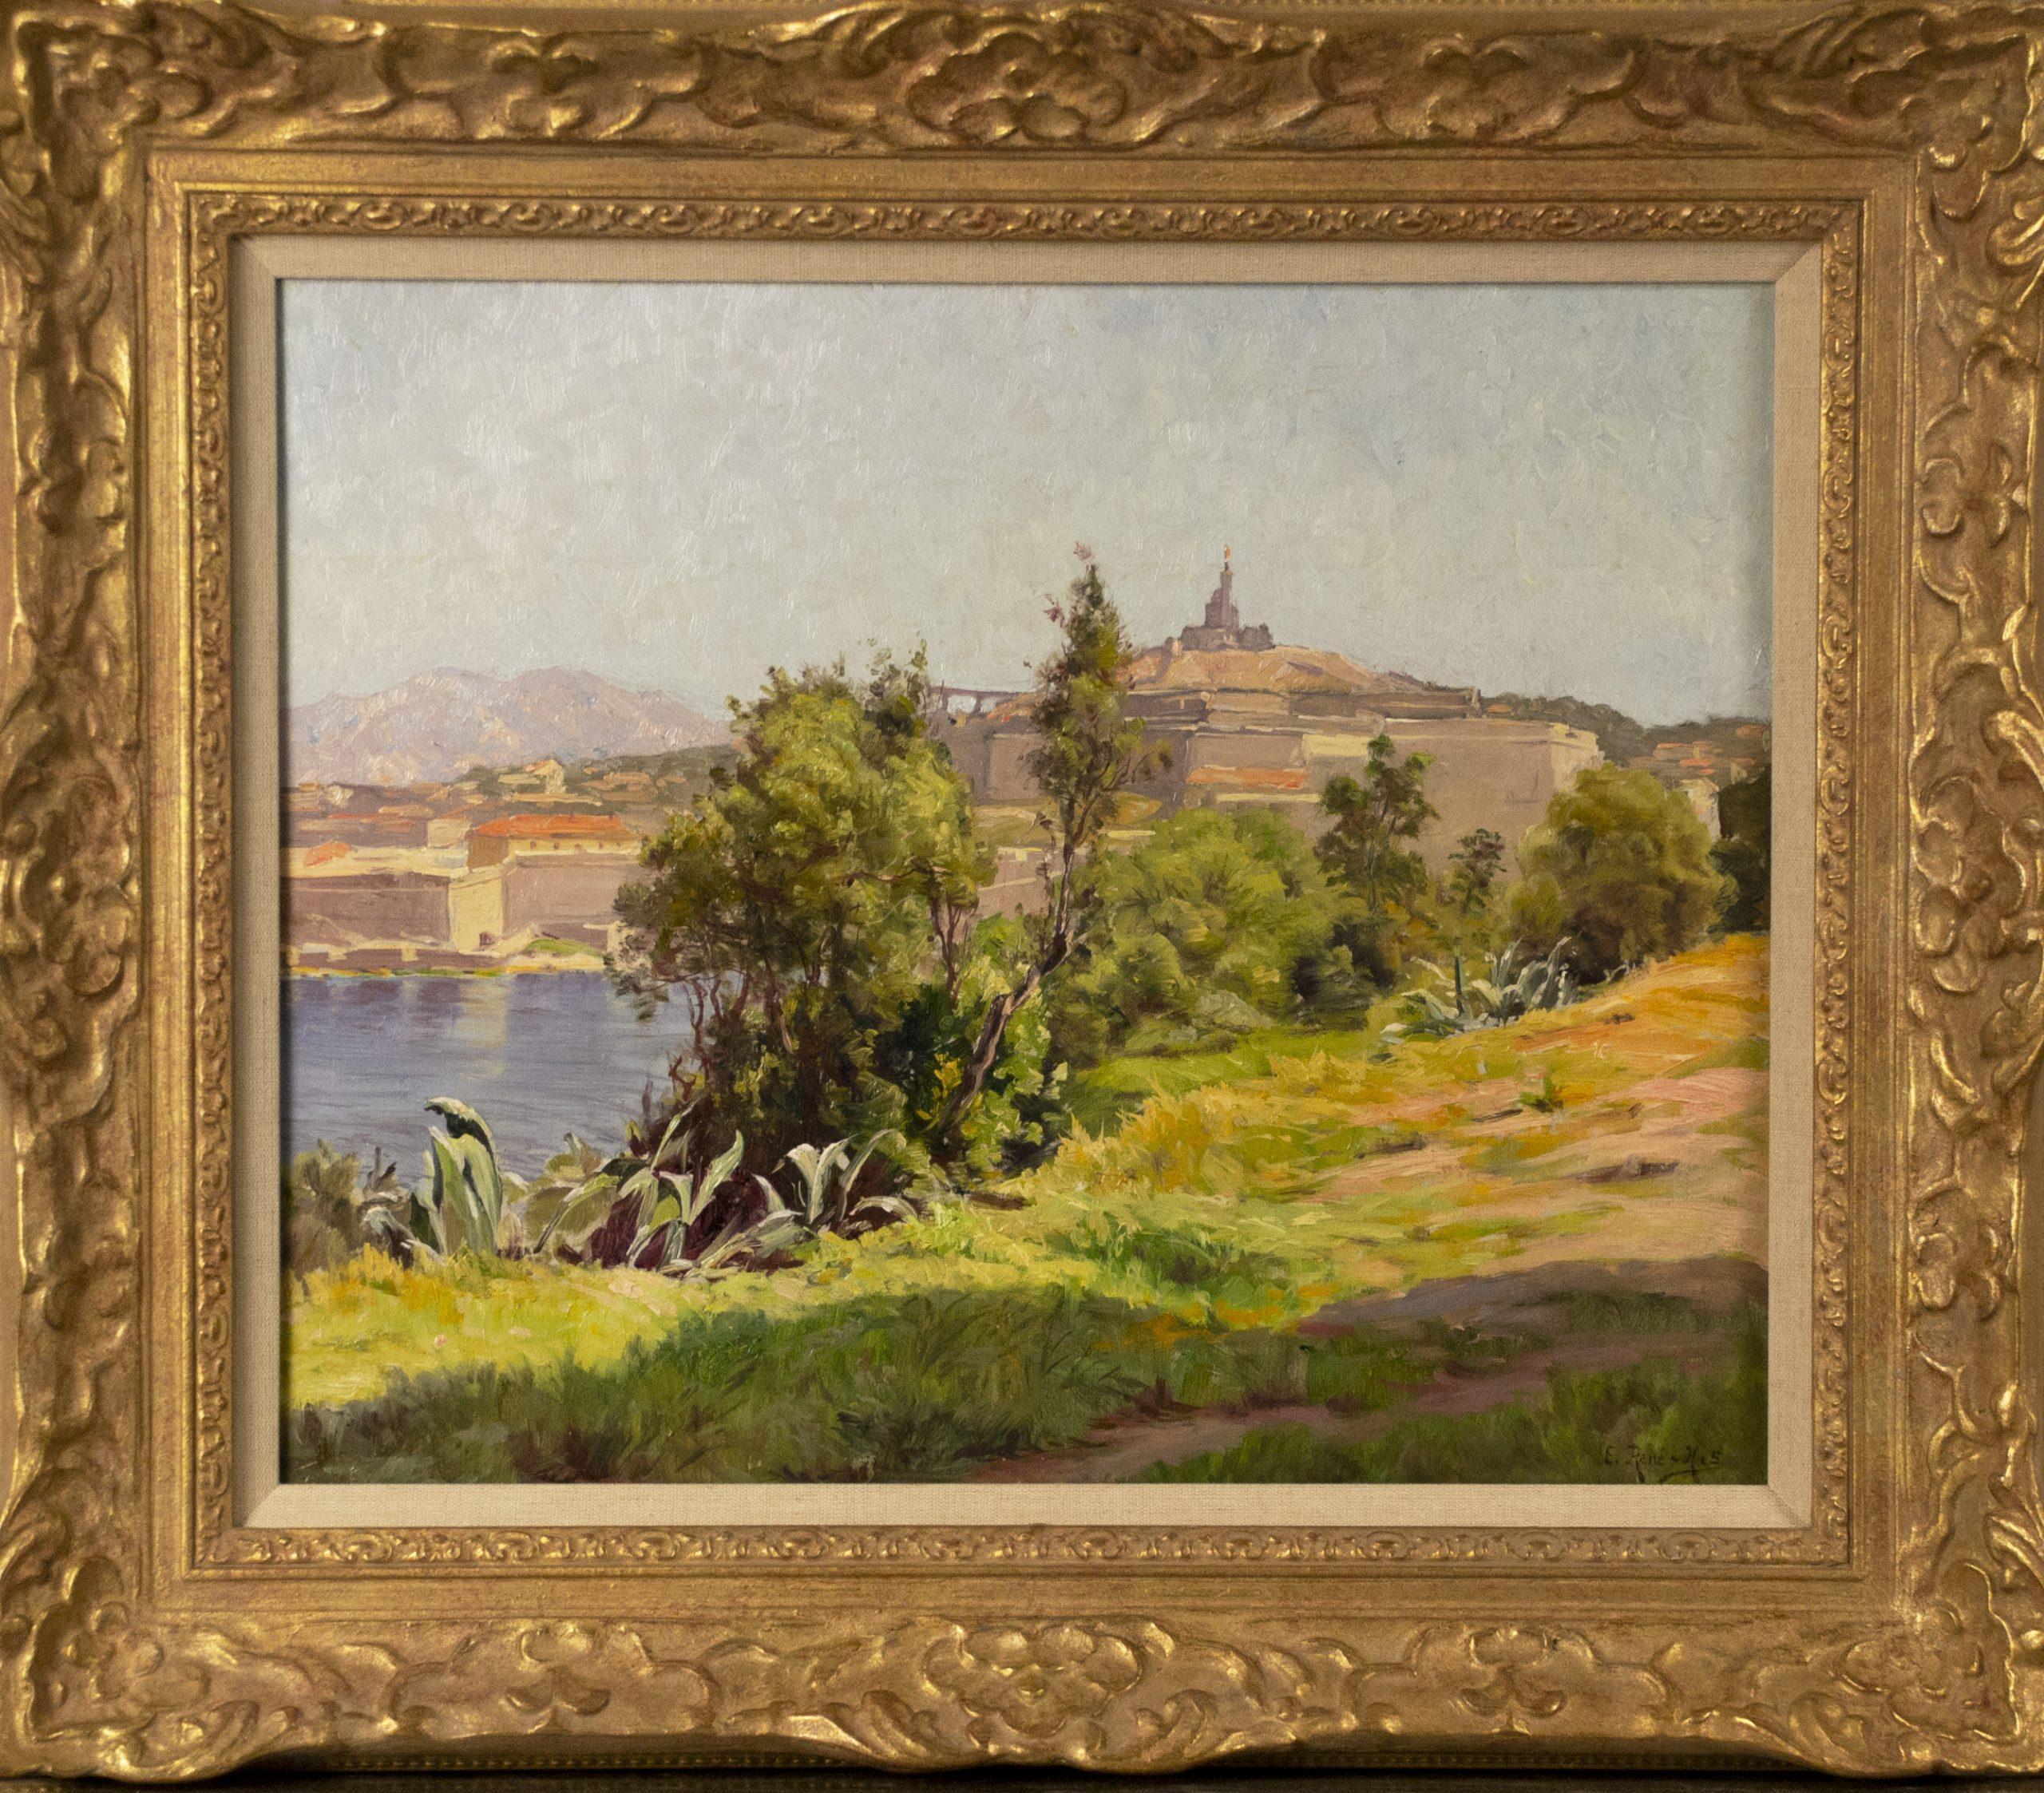 René Charles Edmond His Landscape Painting -  A View in Villefranche , South of France